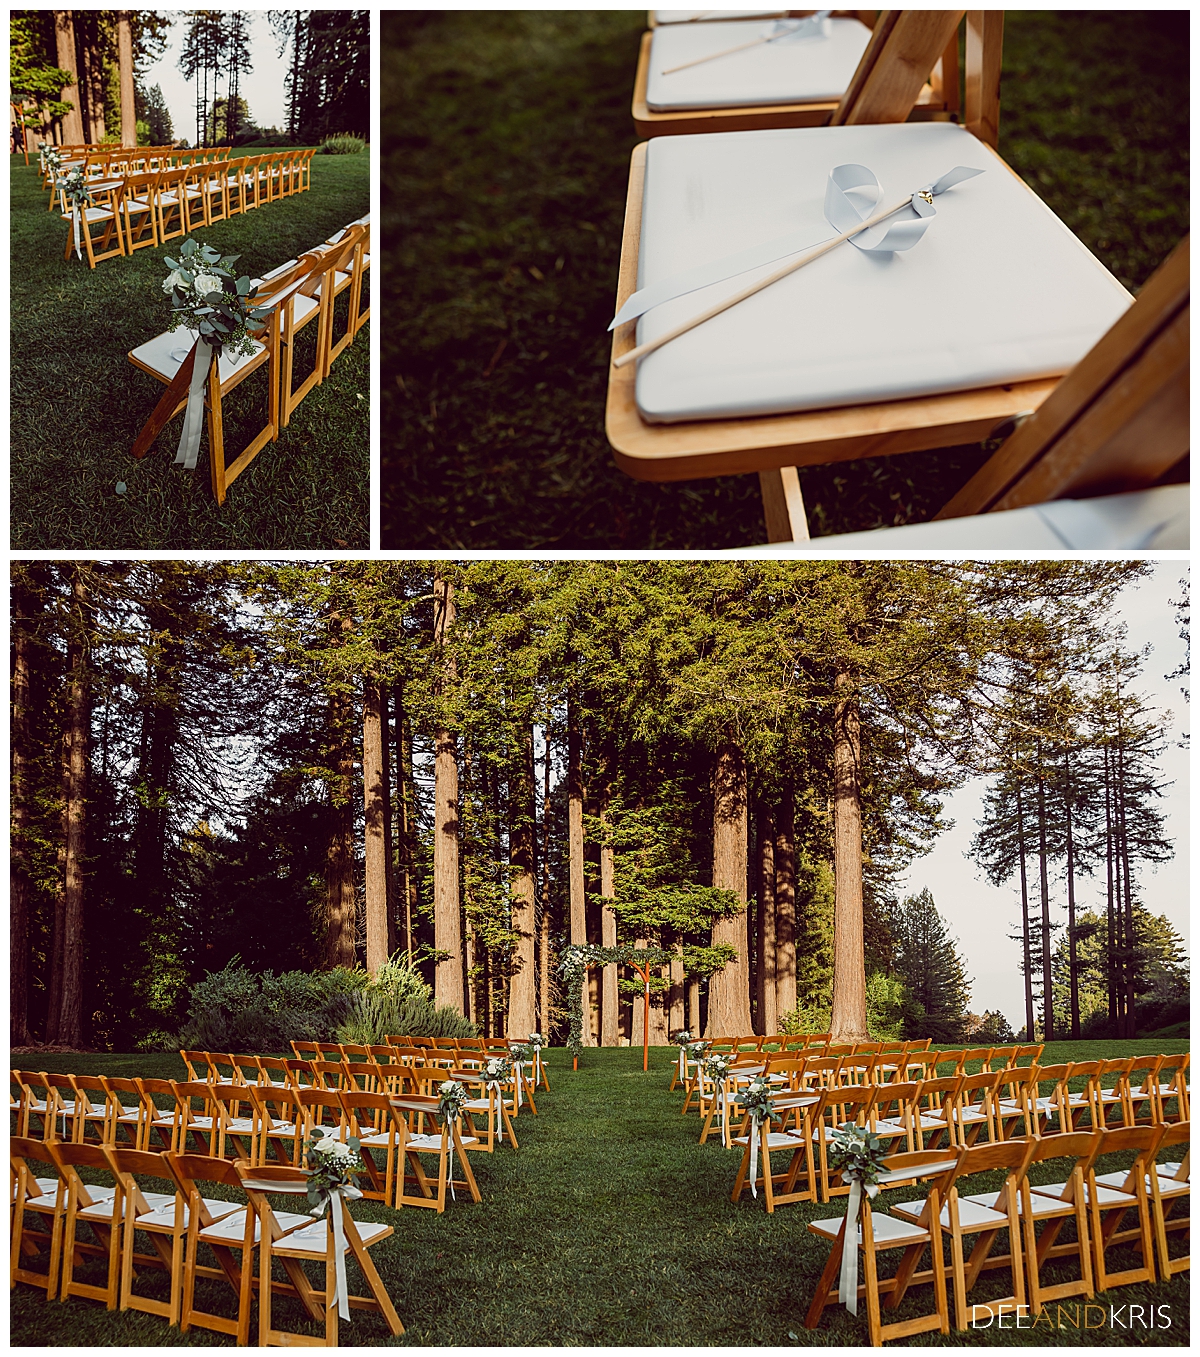 Three images: Top left image of rows of guest seating. Top right image of twirling ribbon favor on seat. Bottom image of wedding arch and seating with redwood trees behind.